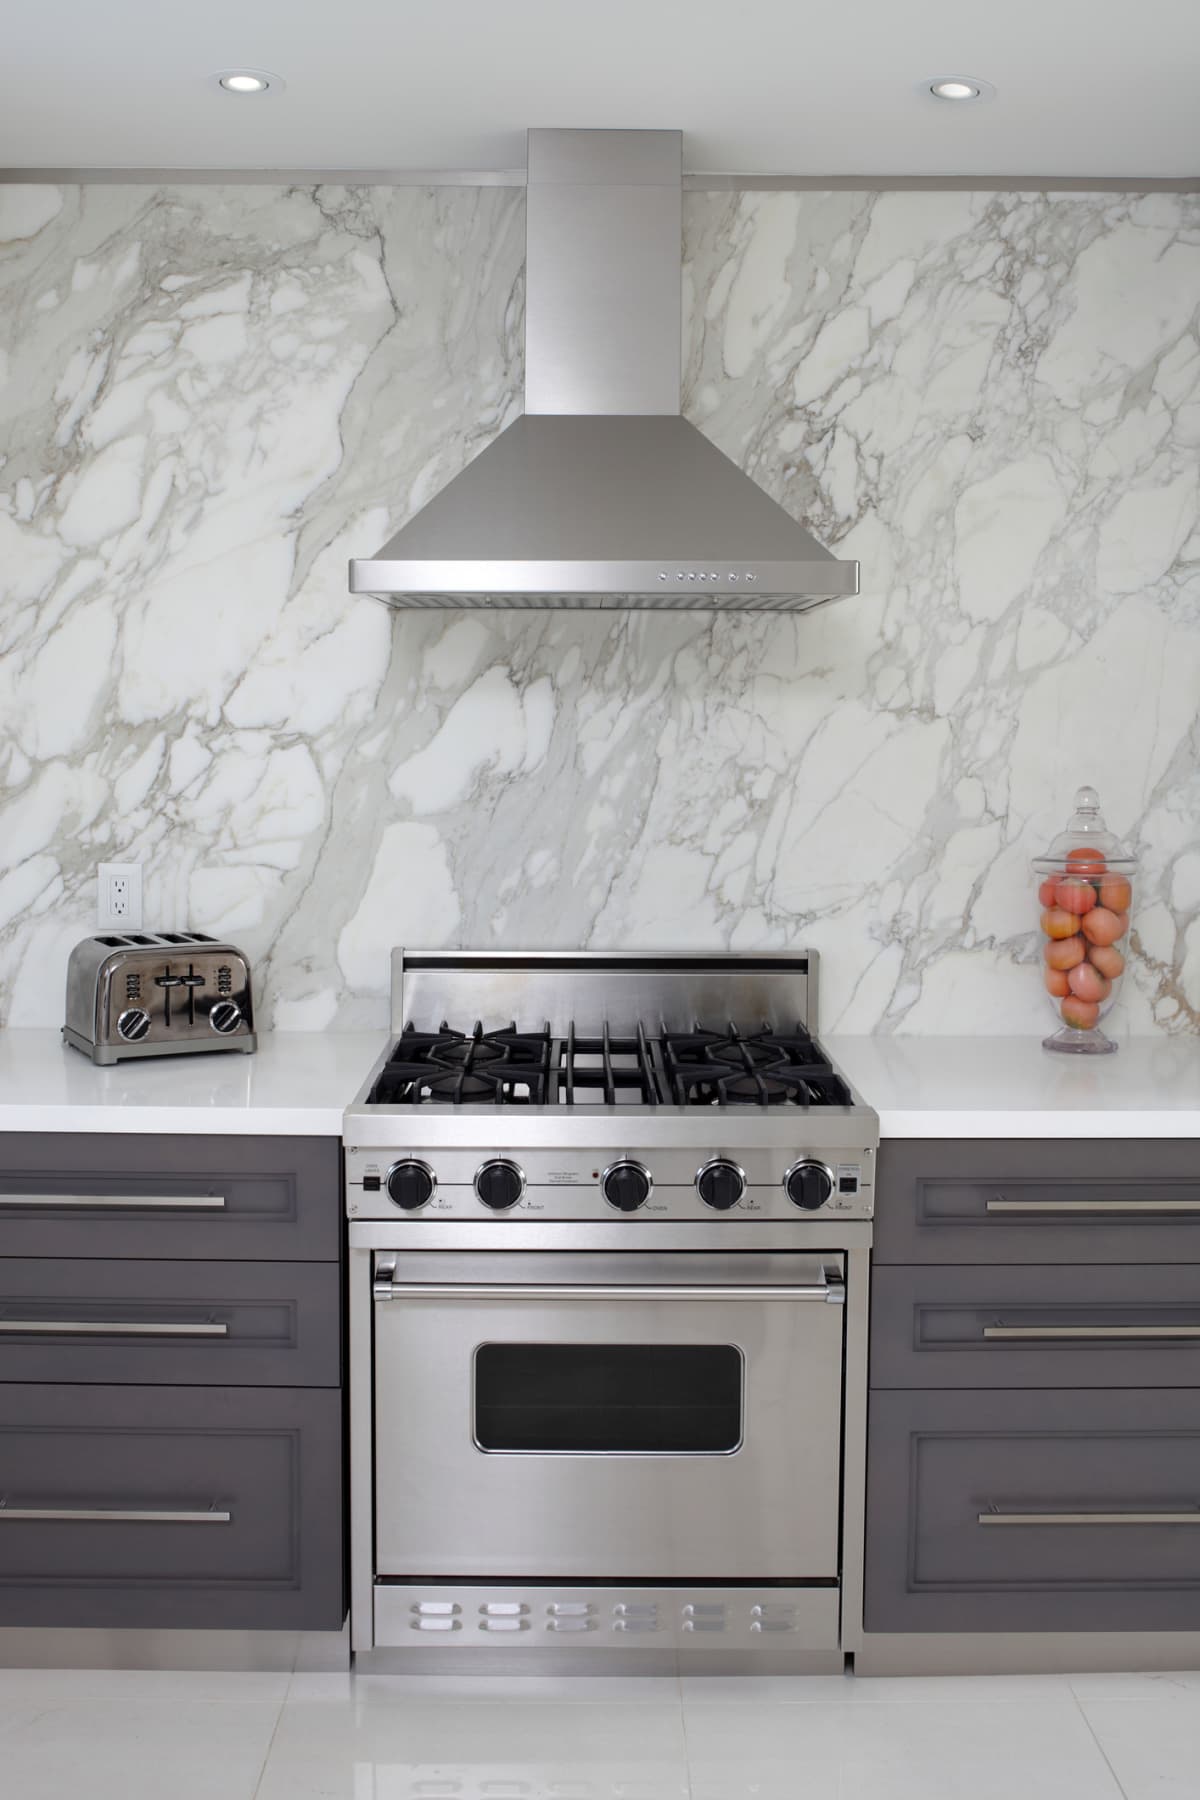 A luxury kitchen with a range hood